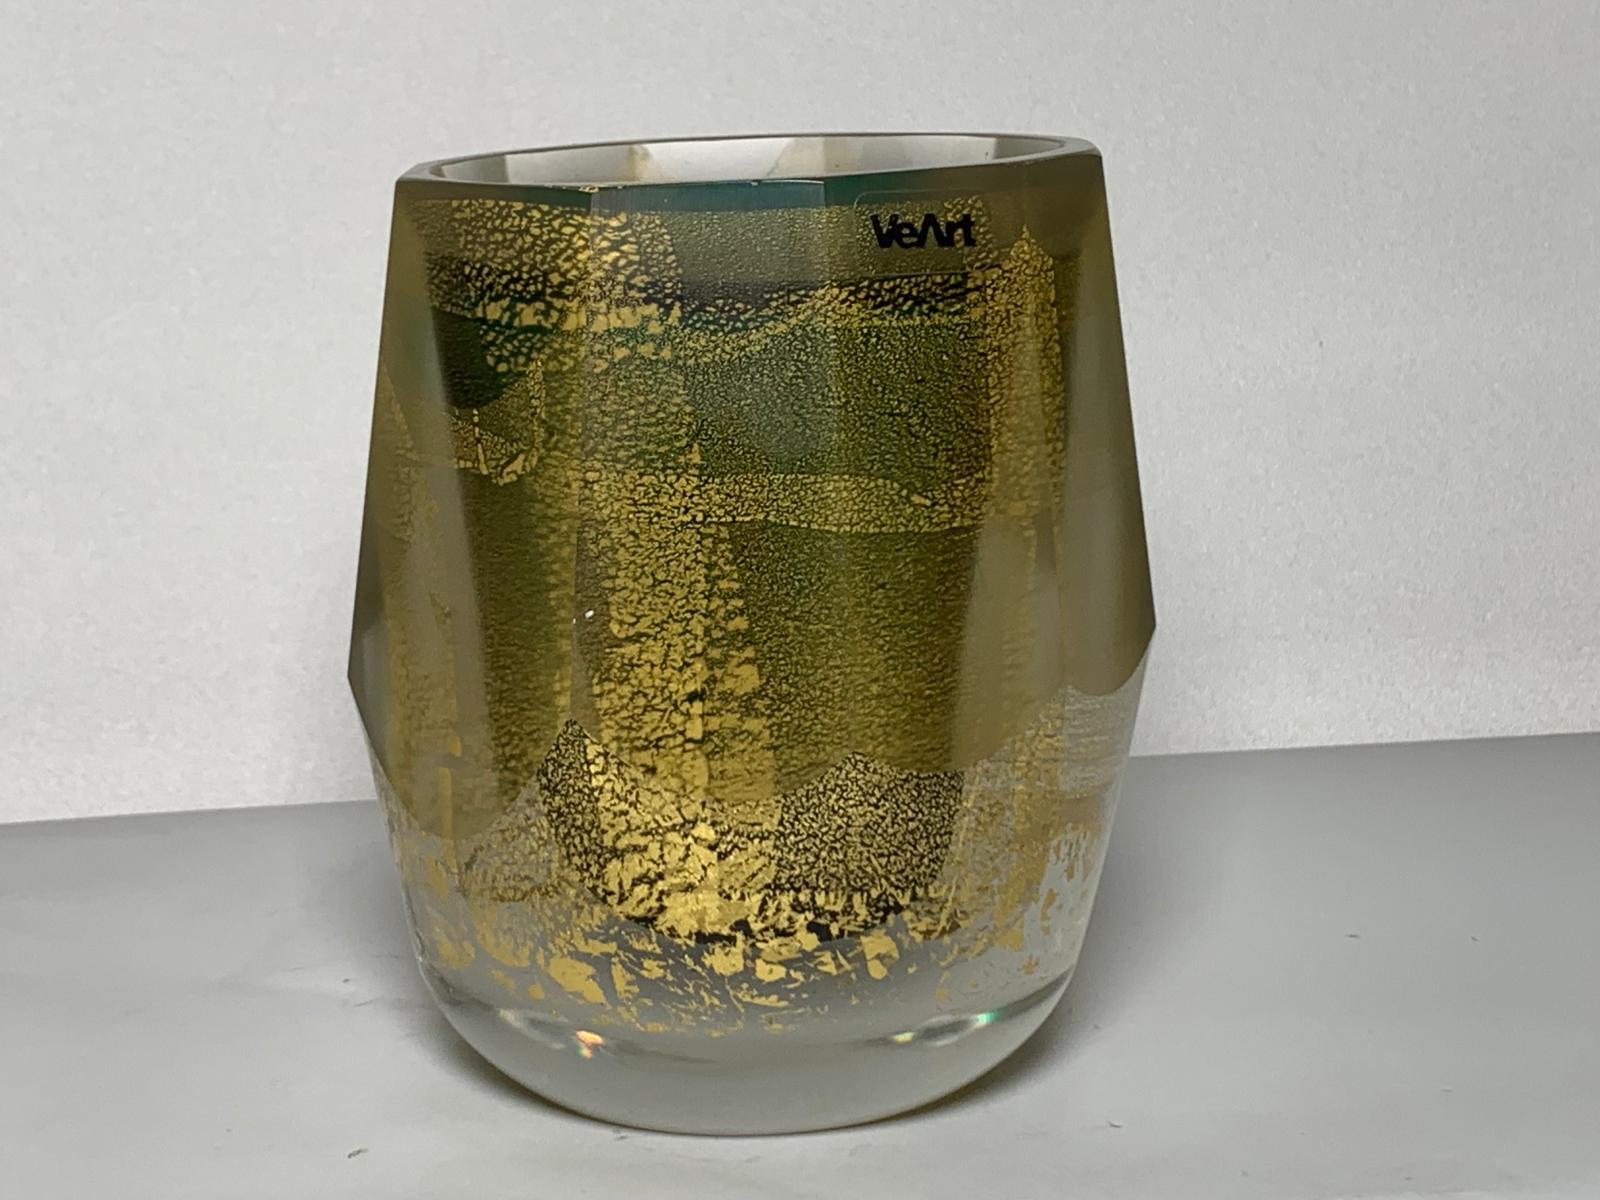 Italian Murano Glass Vase I Molati Series by Afra and Tobia Scarpa for VeArt For Sale 1